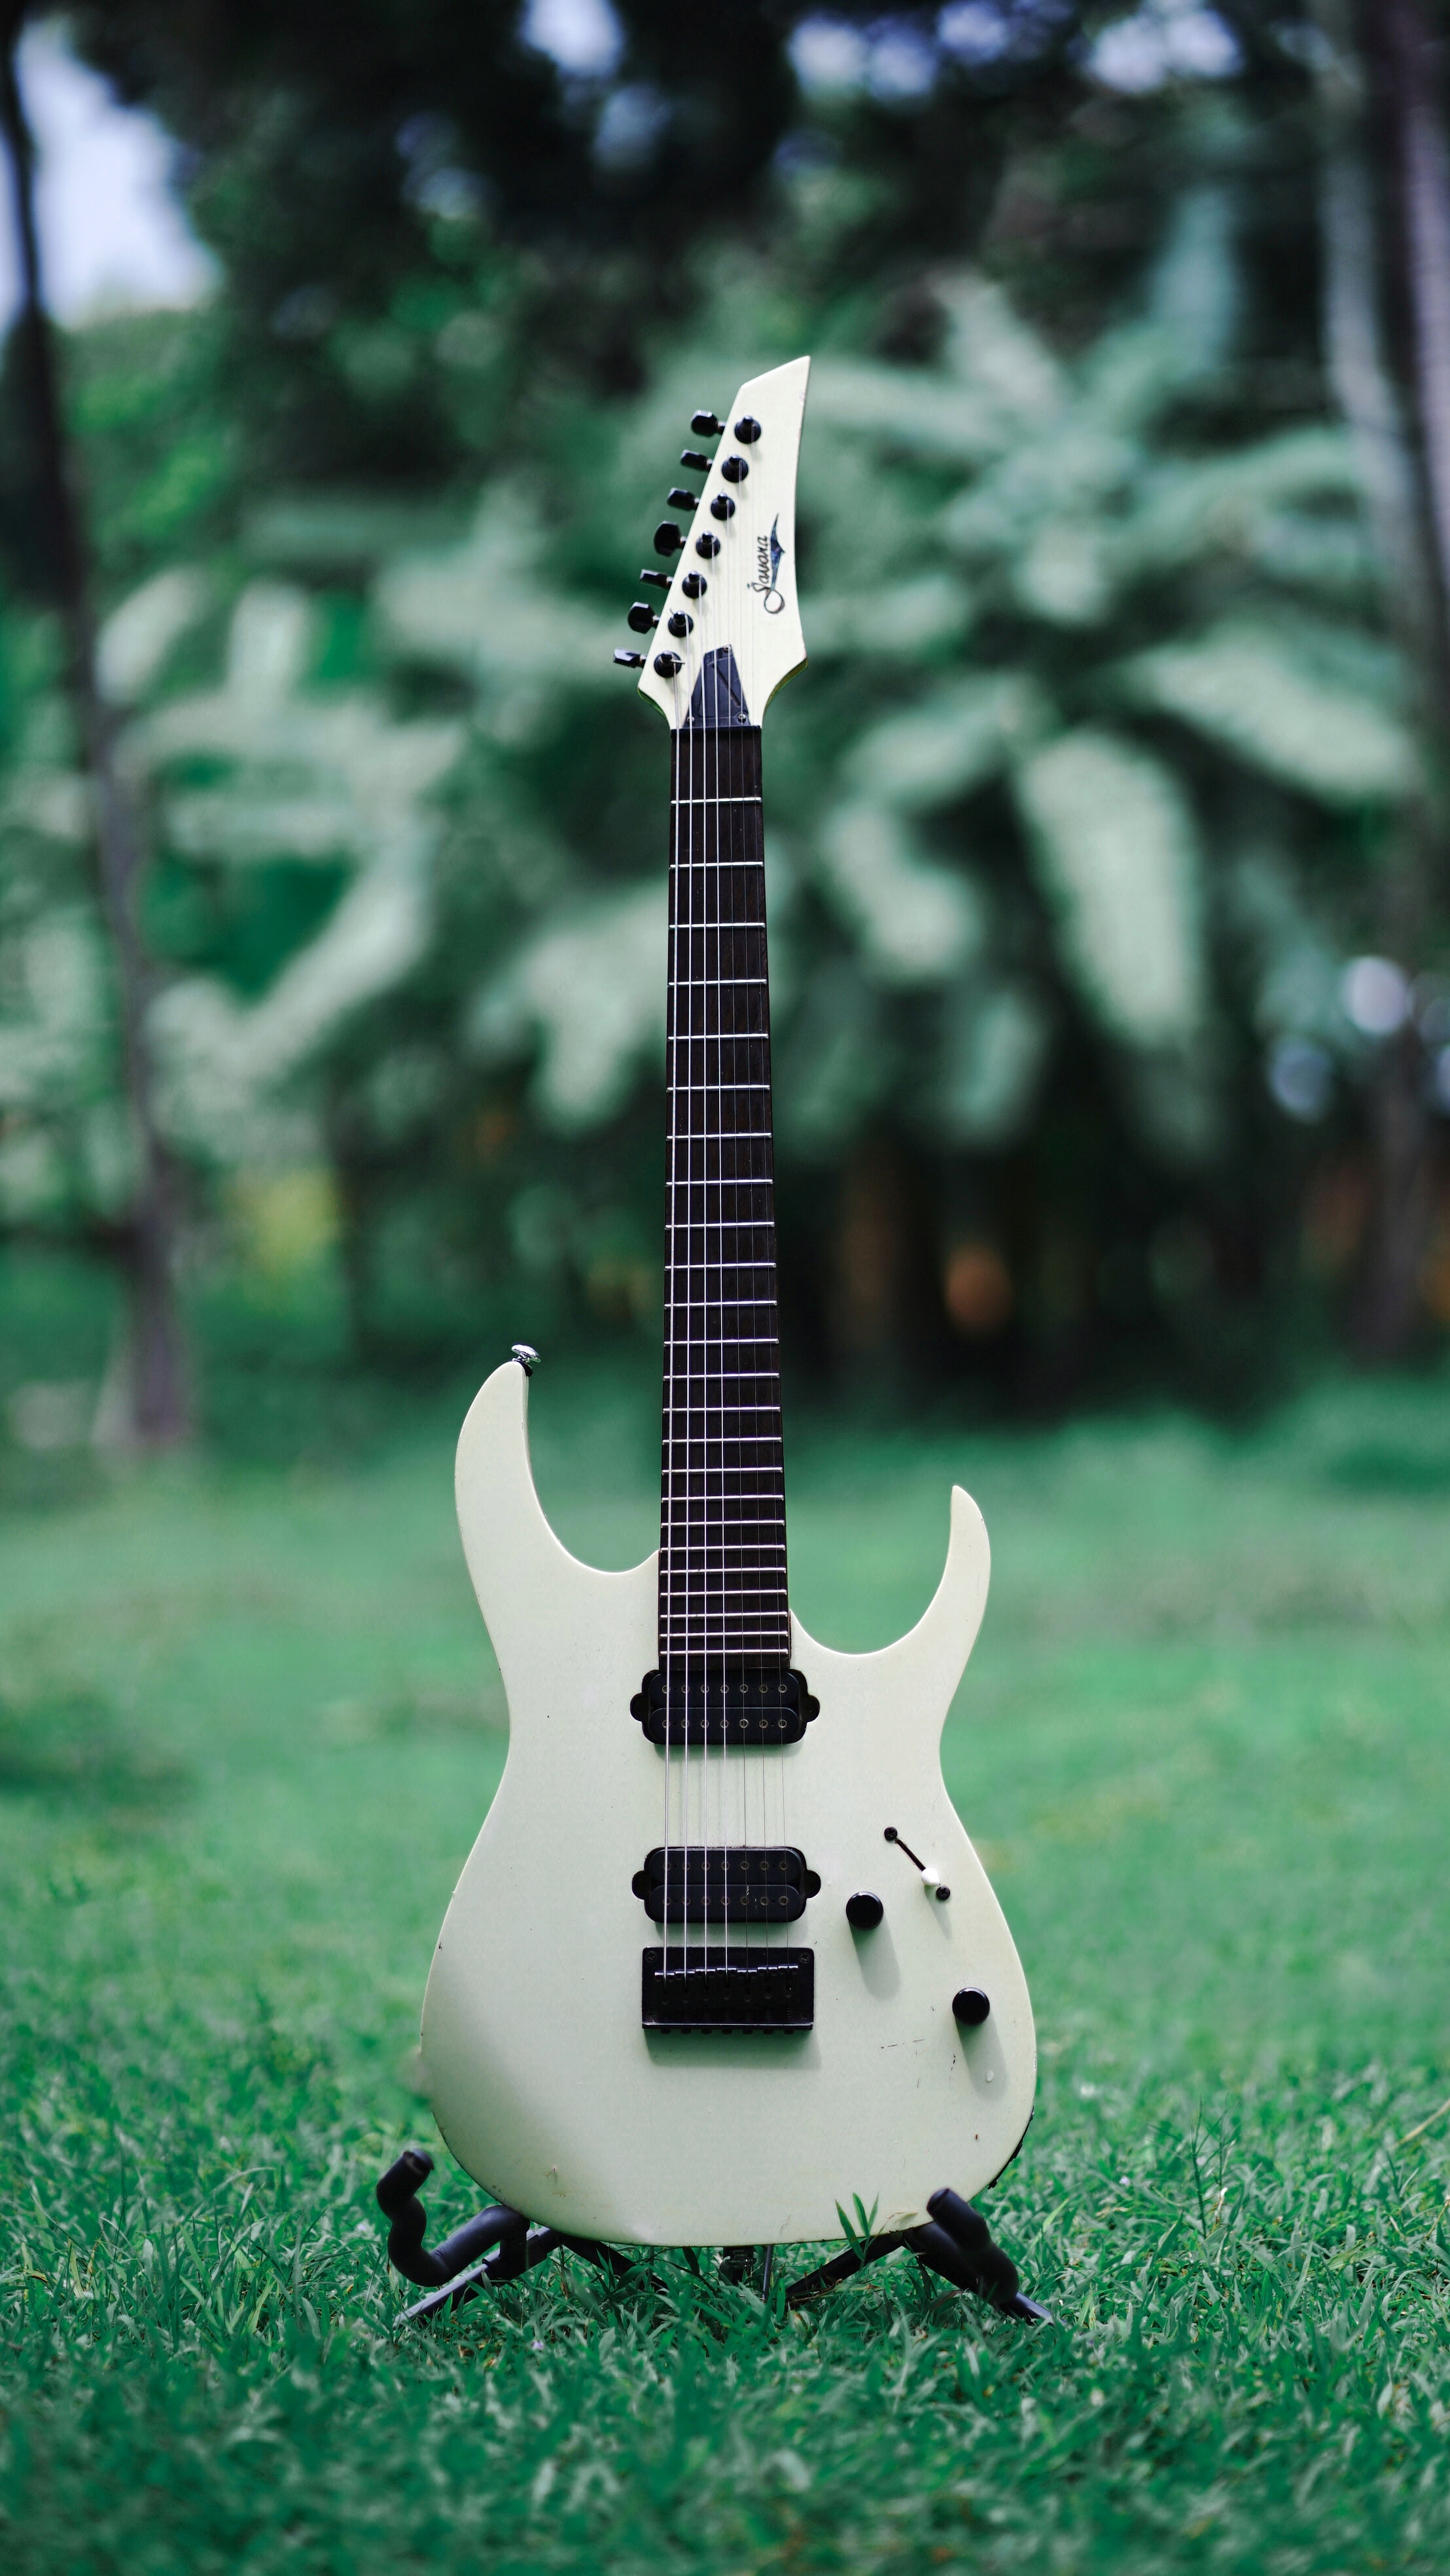 android musical instrument, guitar, music, grass, white, electric guitar